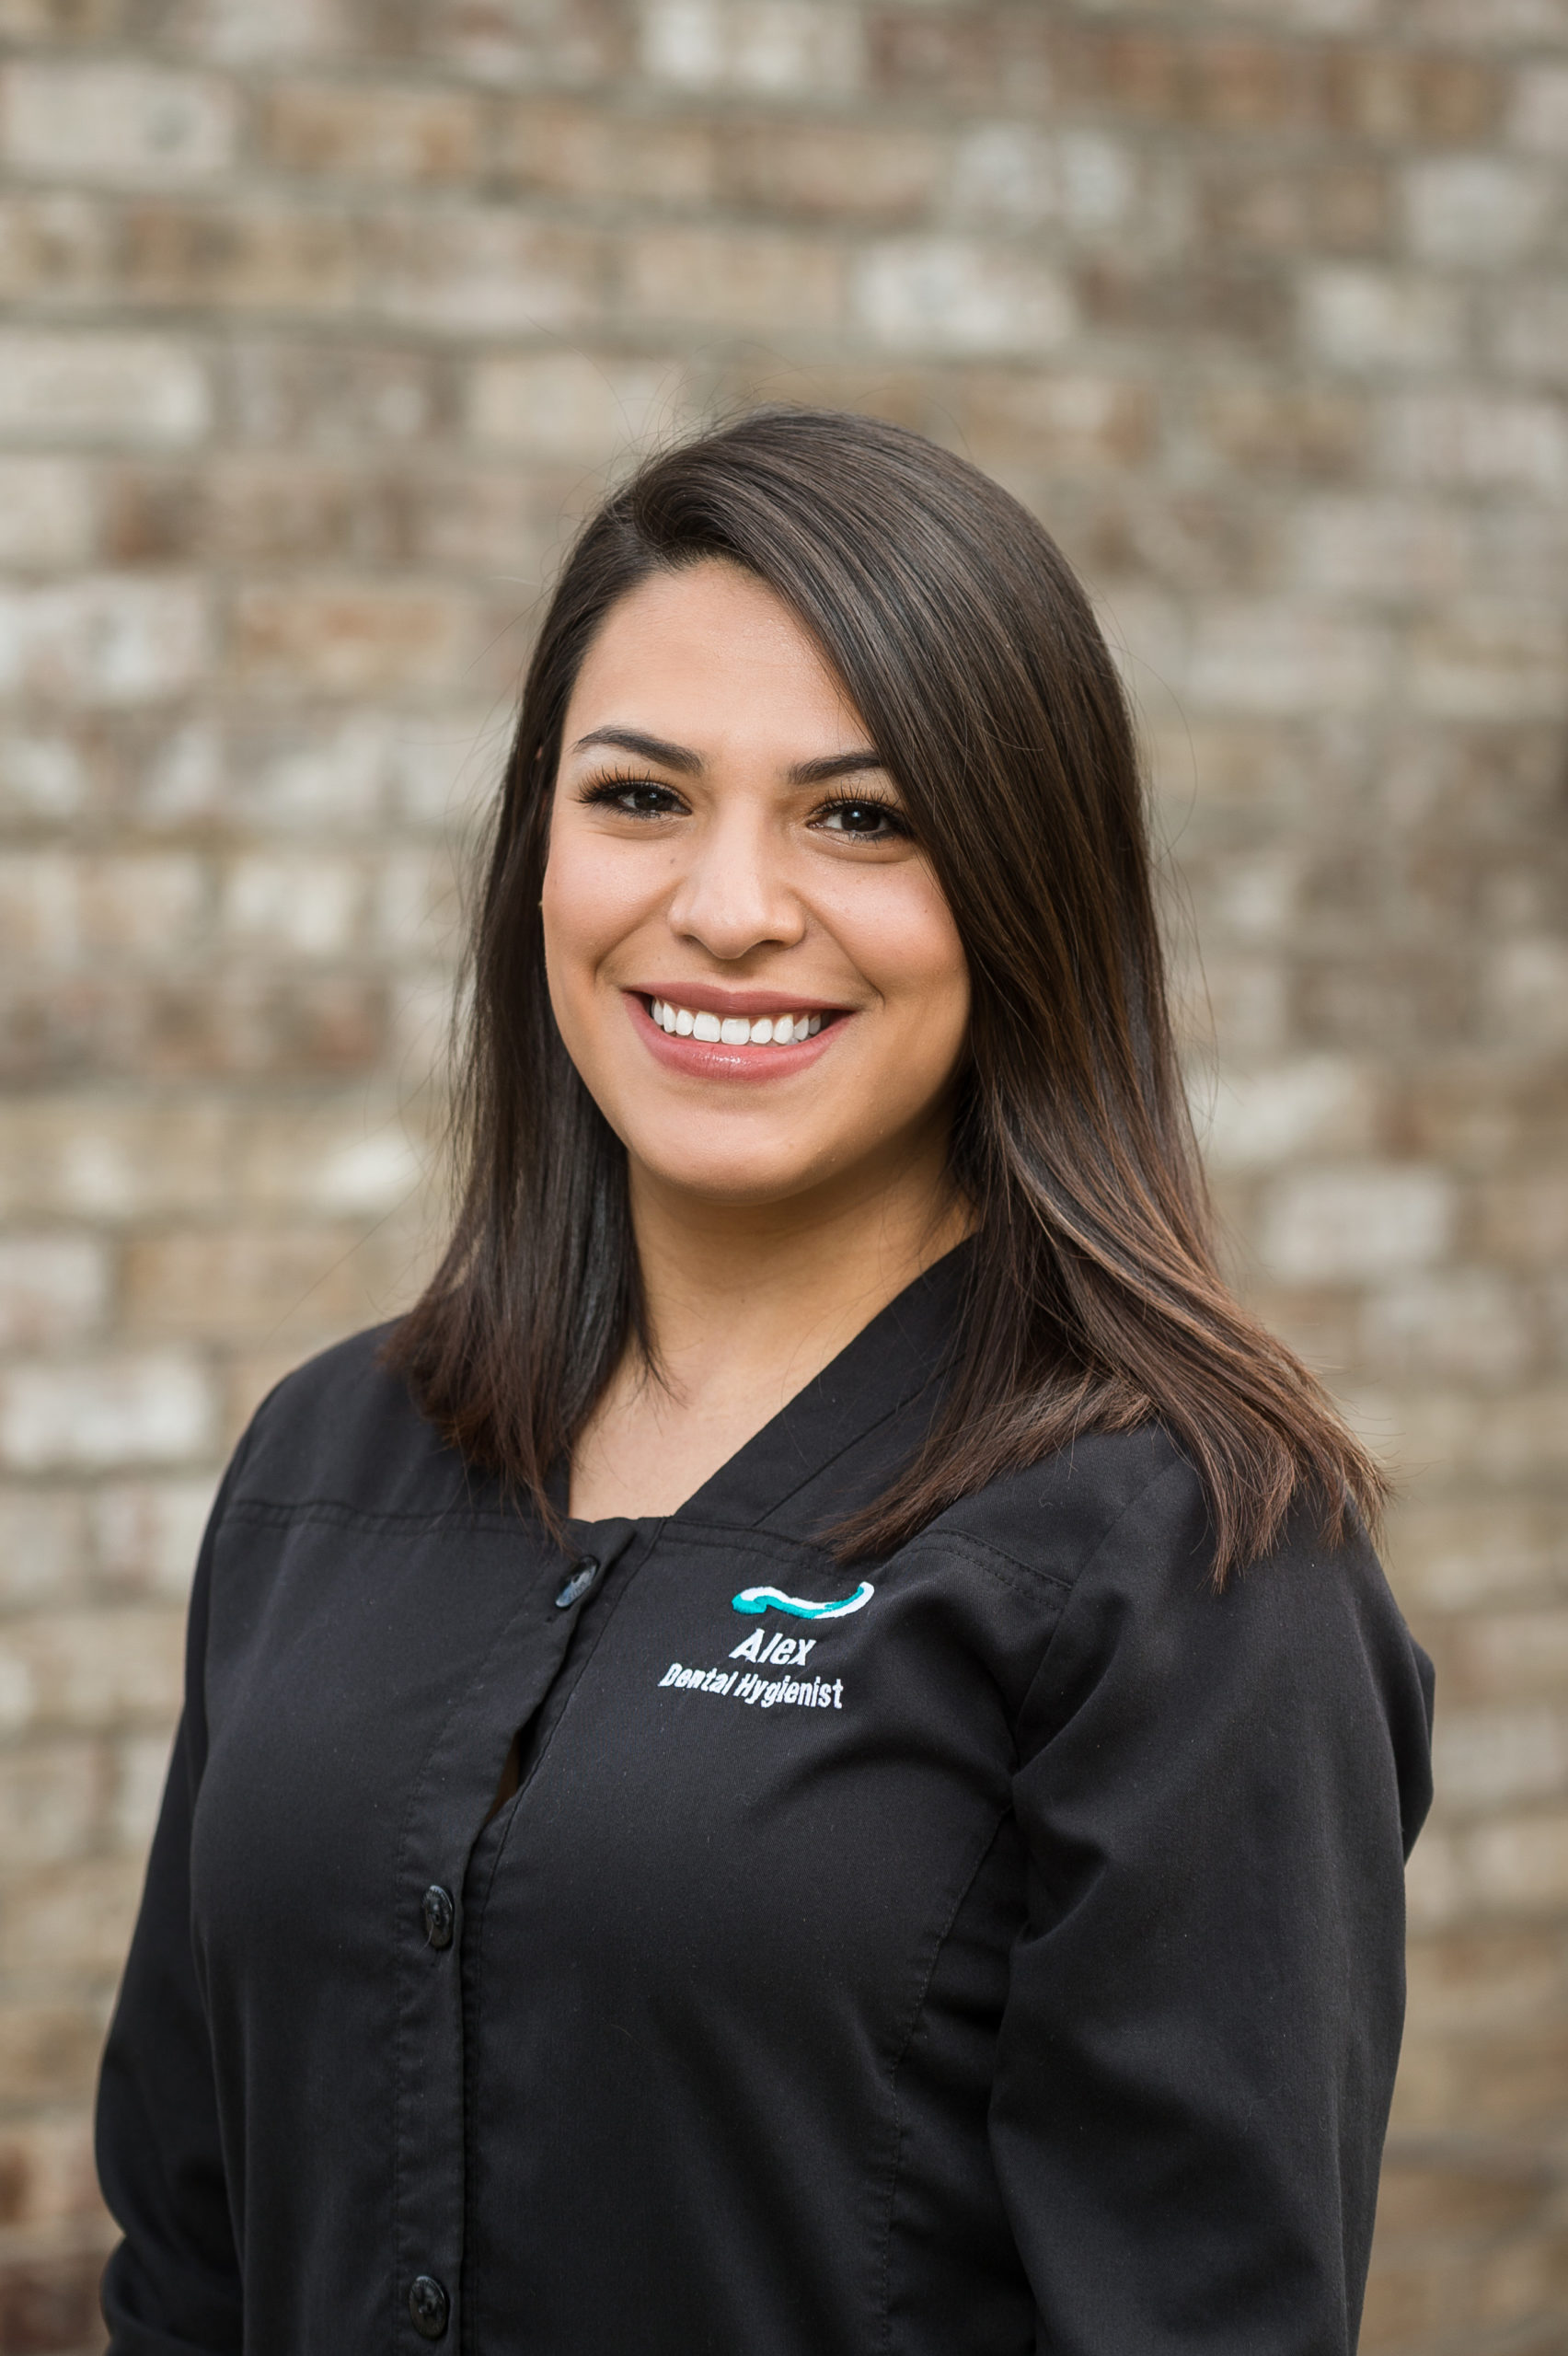 Alex -Dental Hygienist & Spanish Relations from our team